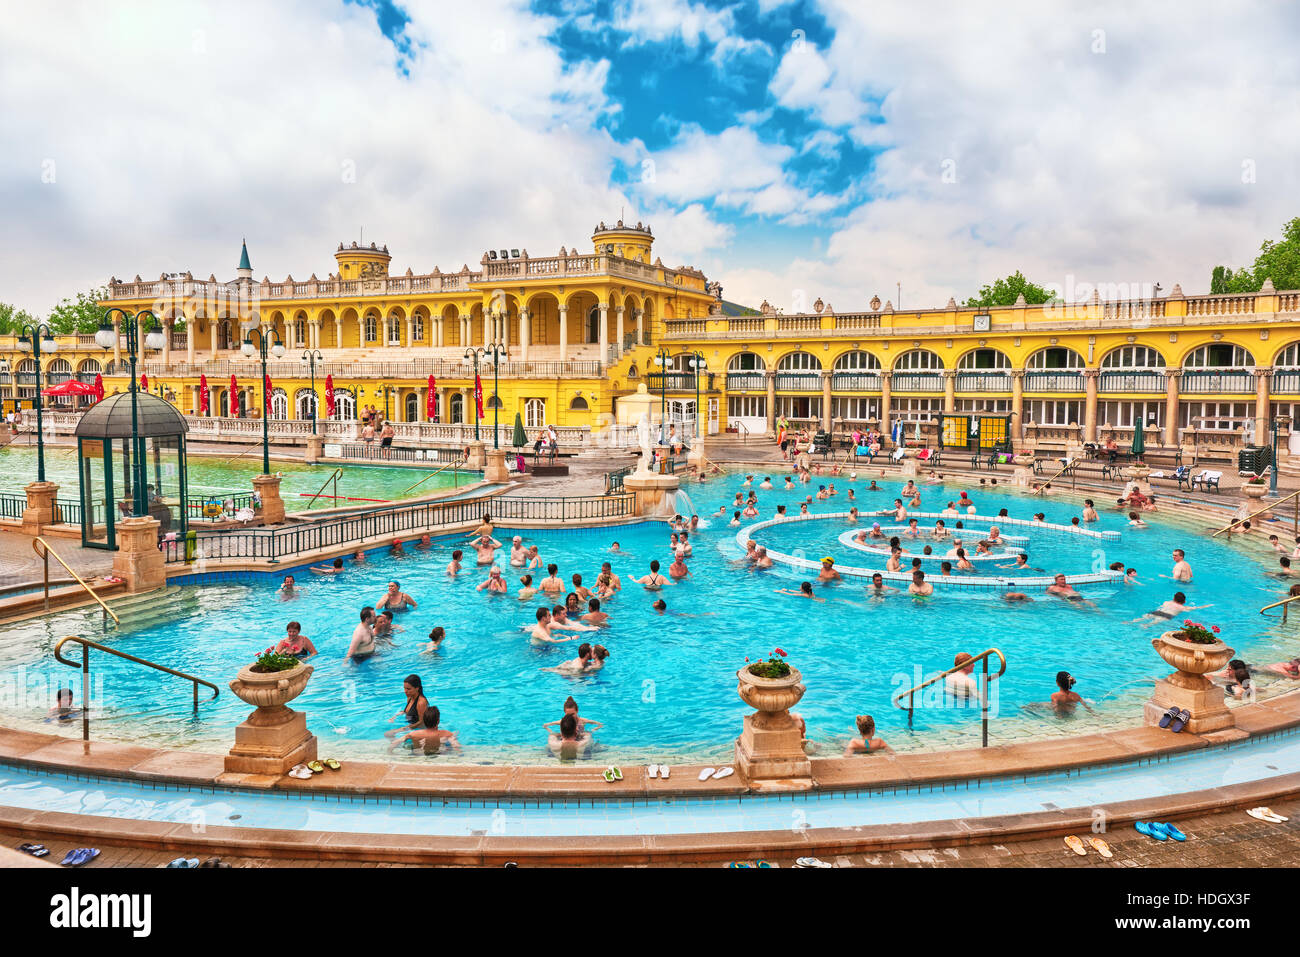 BUDAPEST, HUNGARY - MAY 02,2016: Courtyard of Szechenyi Baths, Hungarian thermal bath complex and spa treatments. Stock Photo